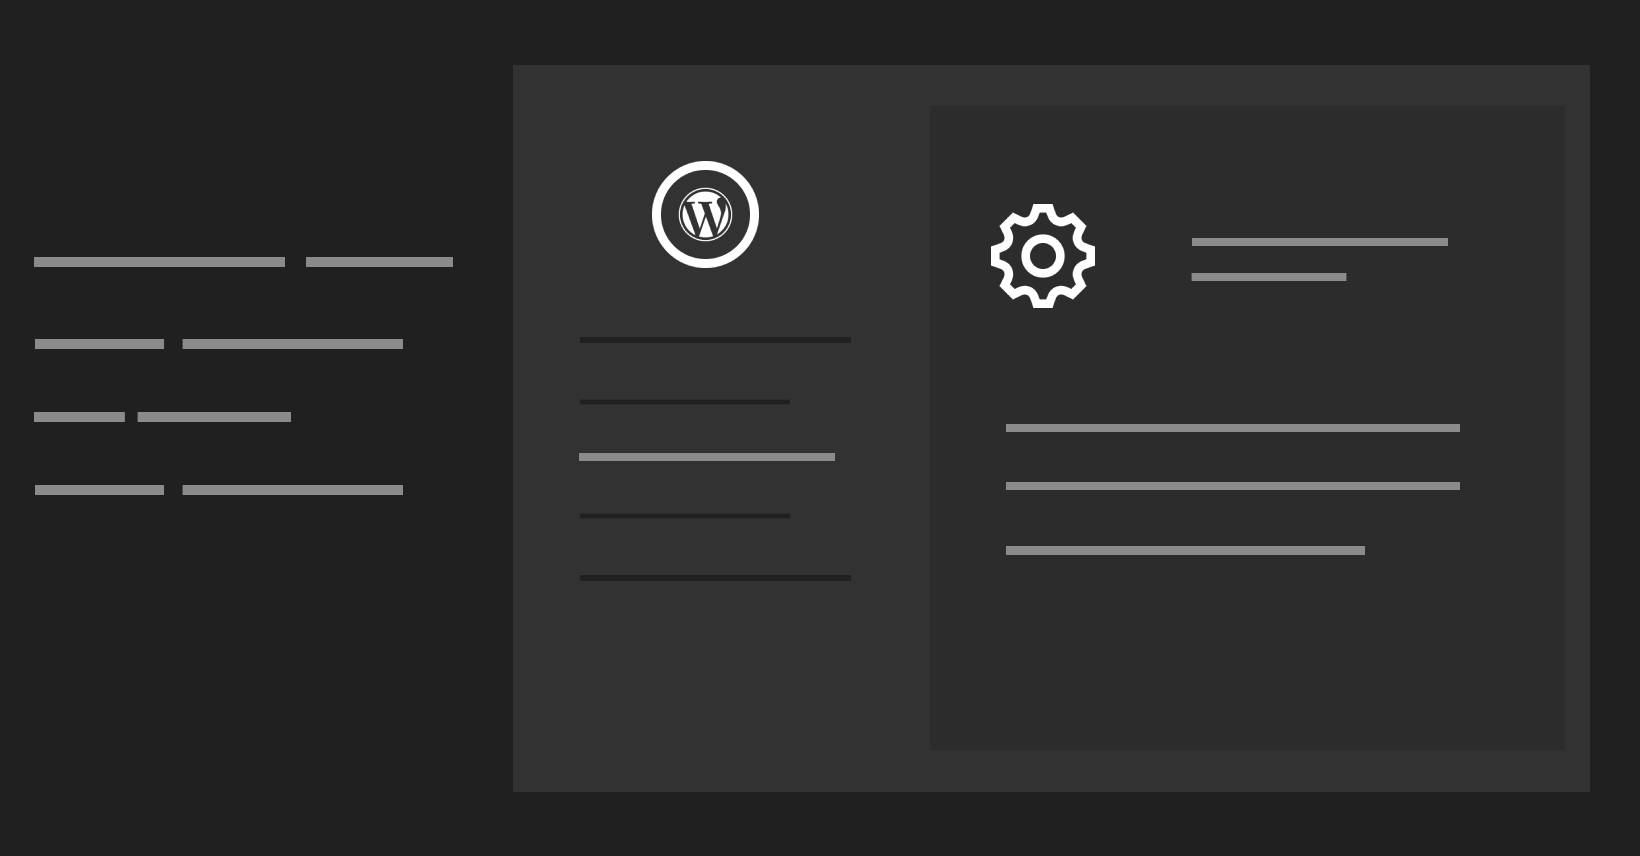 How to create a custom settings page with custom settings fields and sections in WordPress